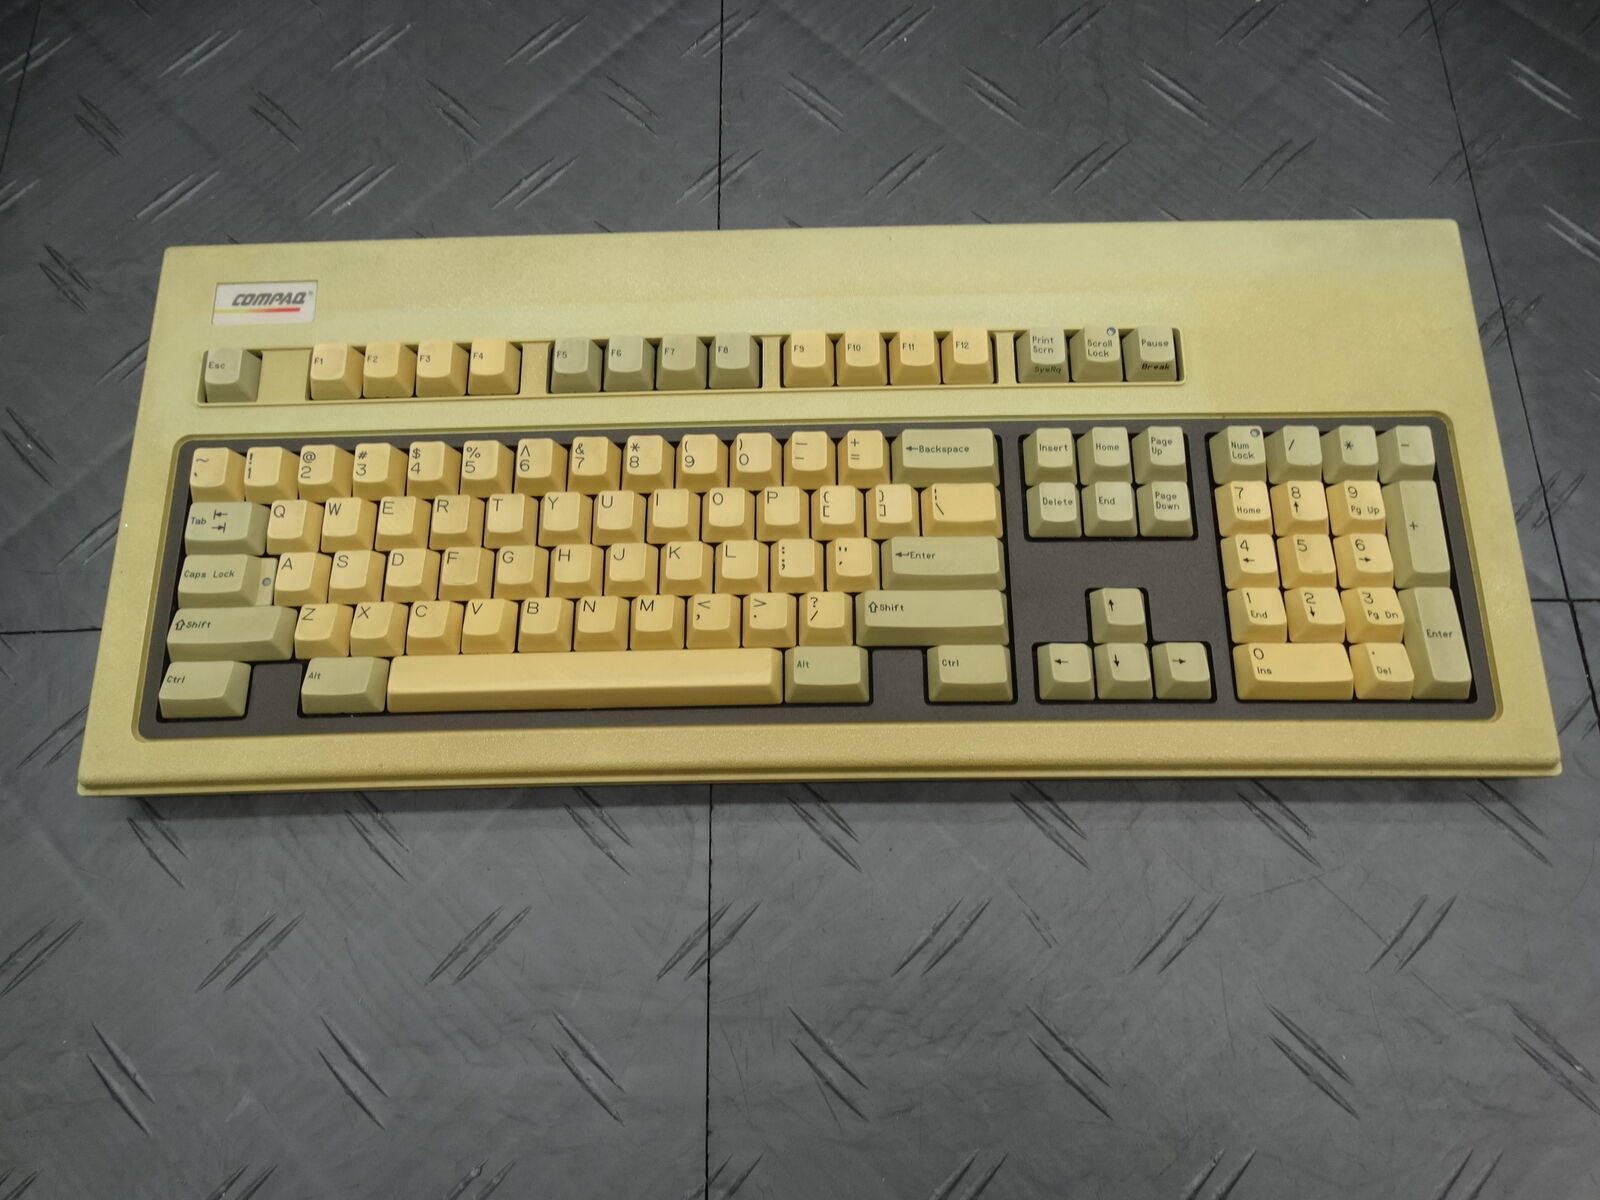 Compaq Mechanical Keyboard Beige Mainframe Collection RT101 XT/AT Connection